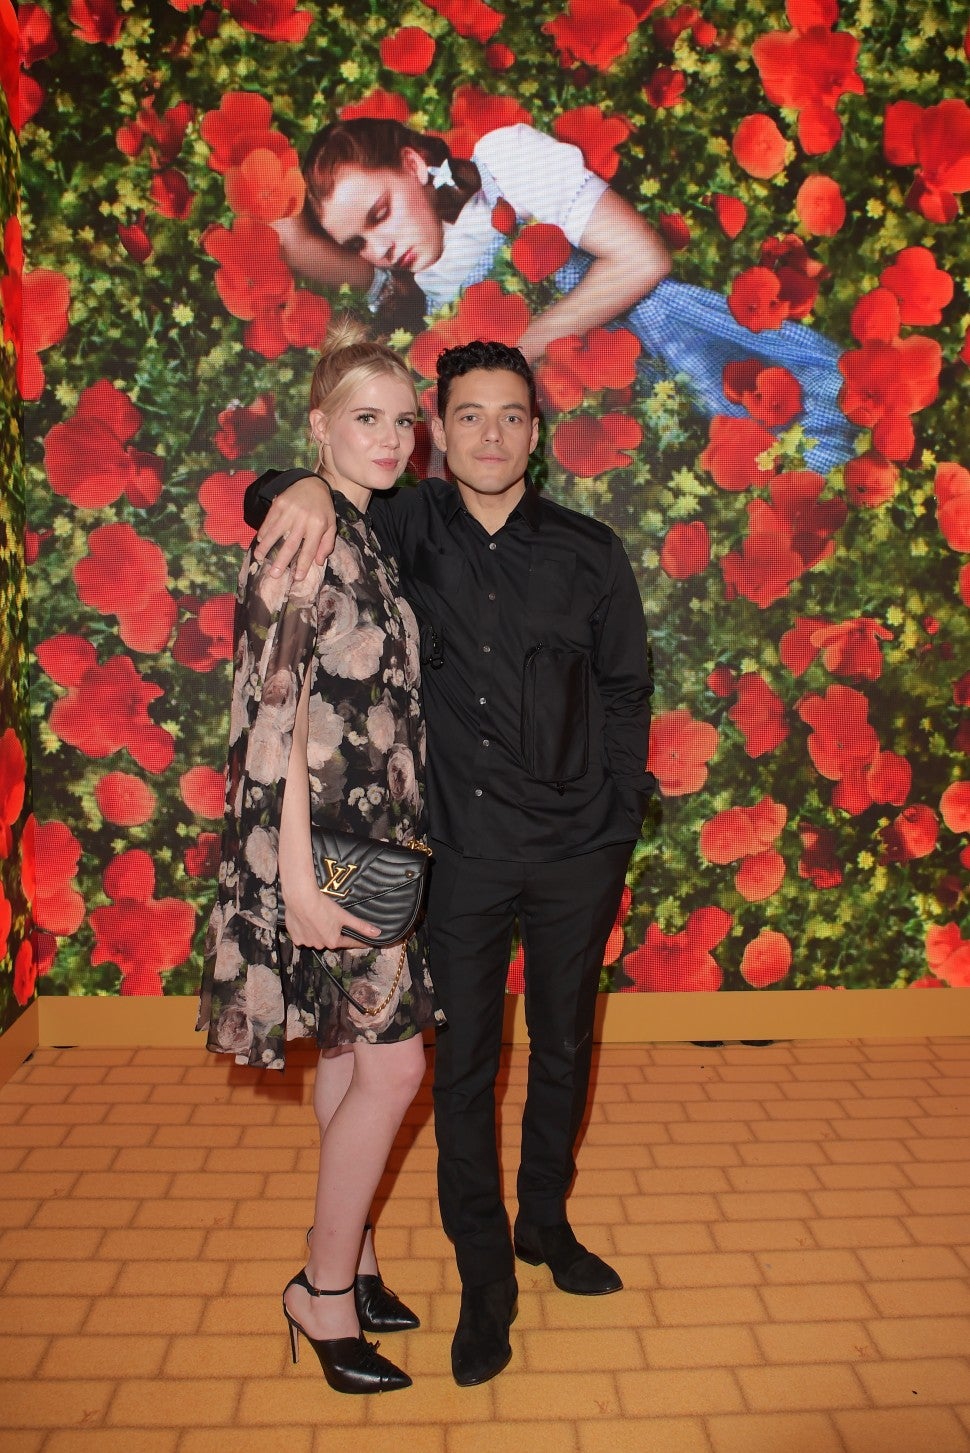 Lucy Boynton and Rami Malek attend the Louis Vuitton and Virgil Abloh London Pop-Up on October 19, 2018 in London, United Kingdom.